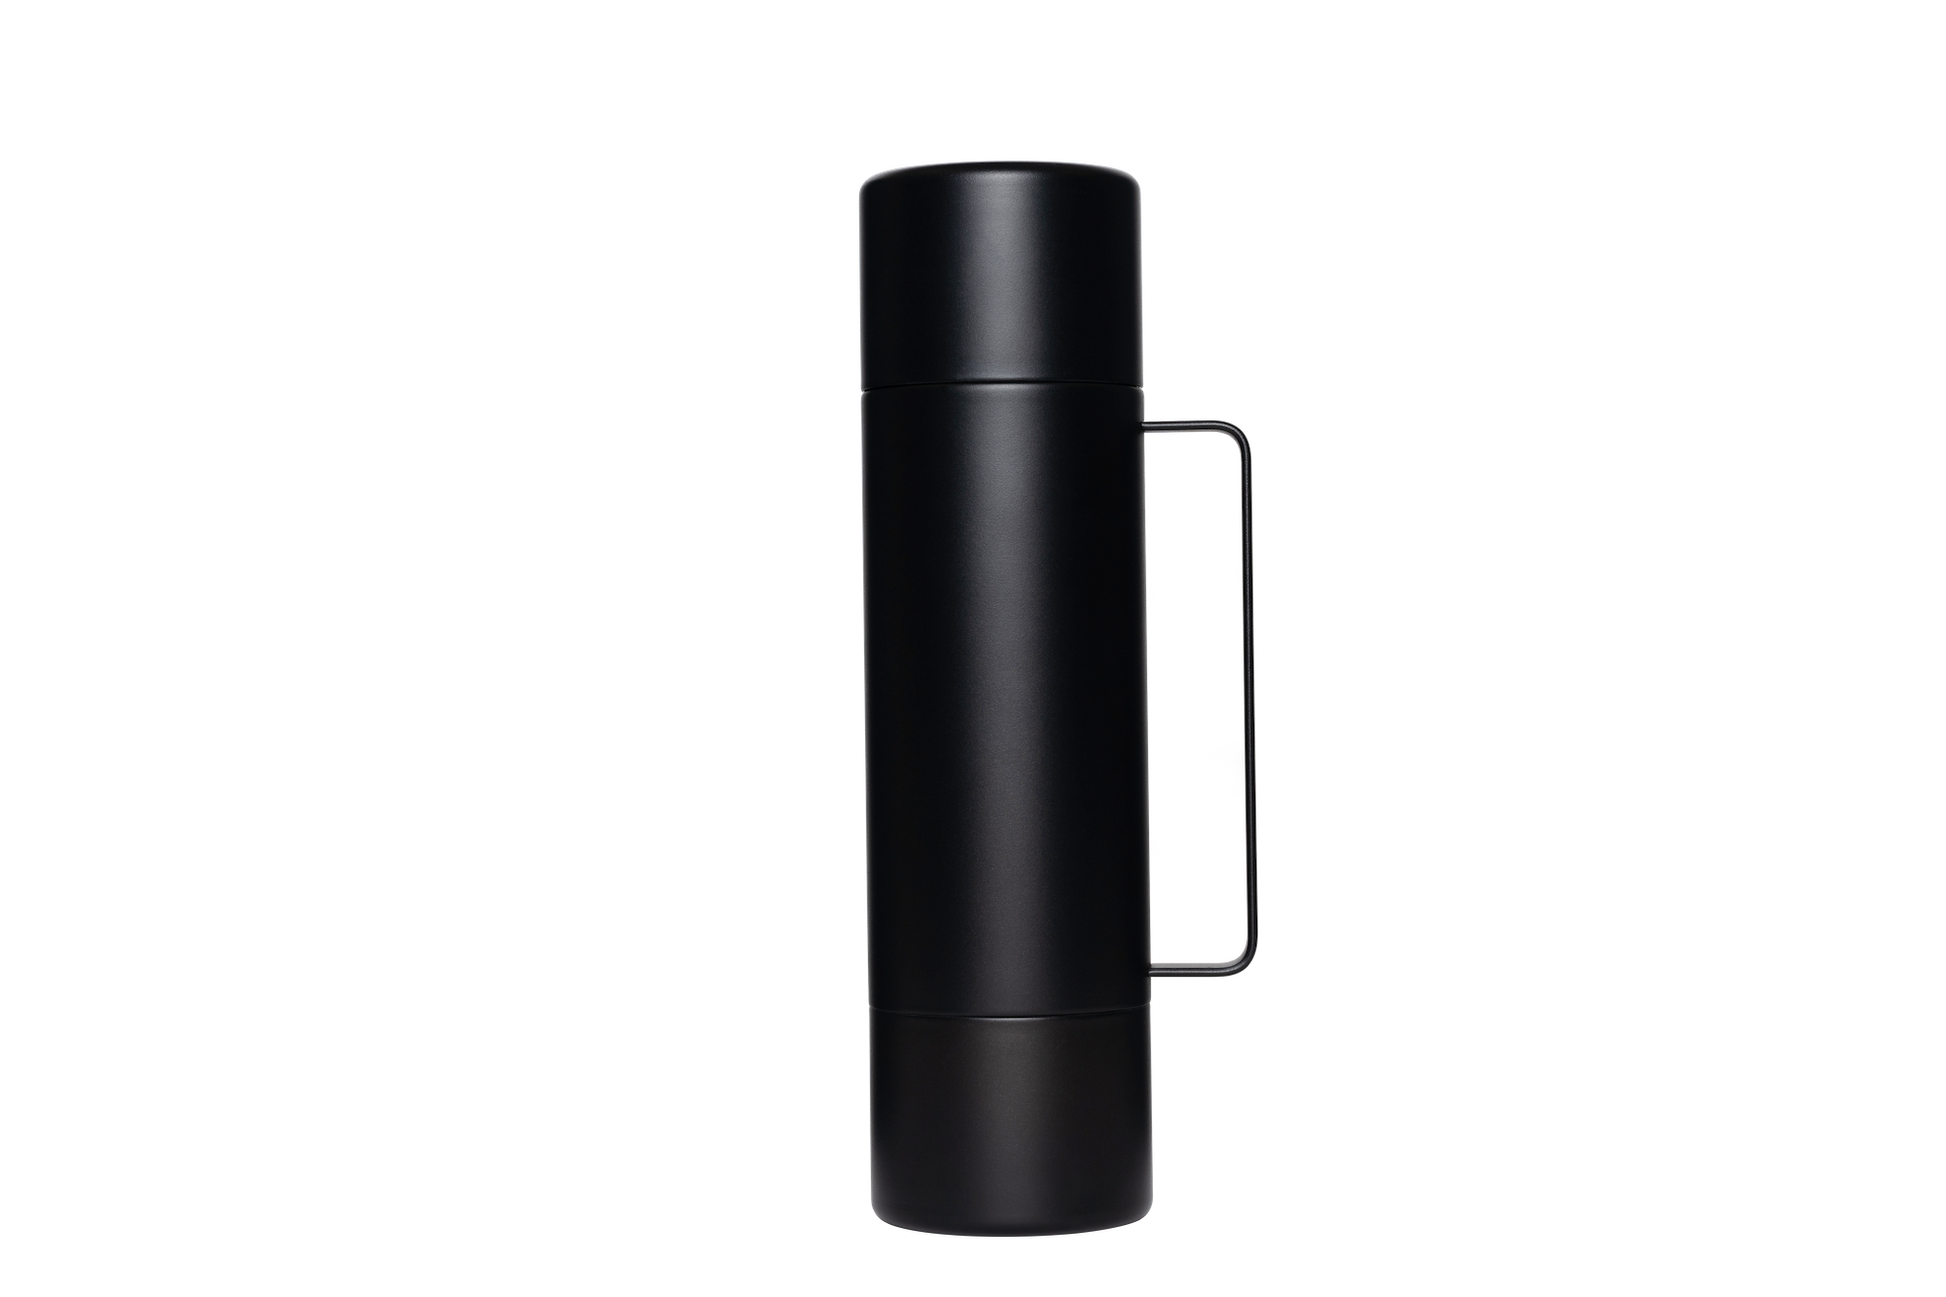 Taking its name from the Japanese word meaning "friend" or "companion", the MiiR Tomo rethinks the traditional flask or thermos with sharing in mind.